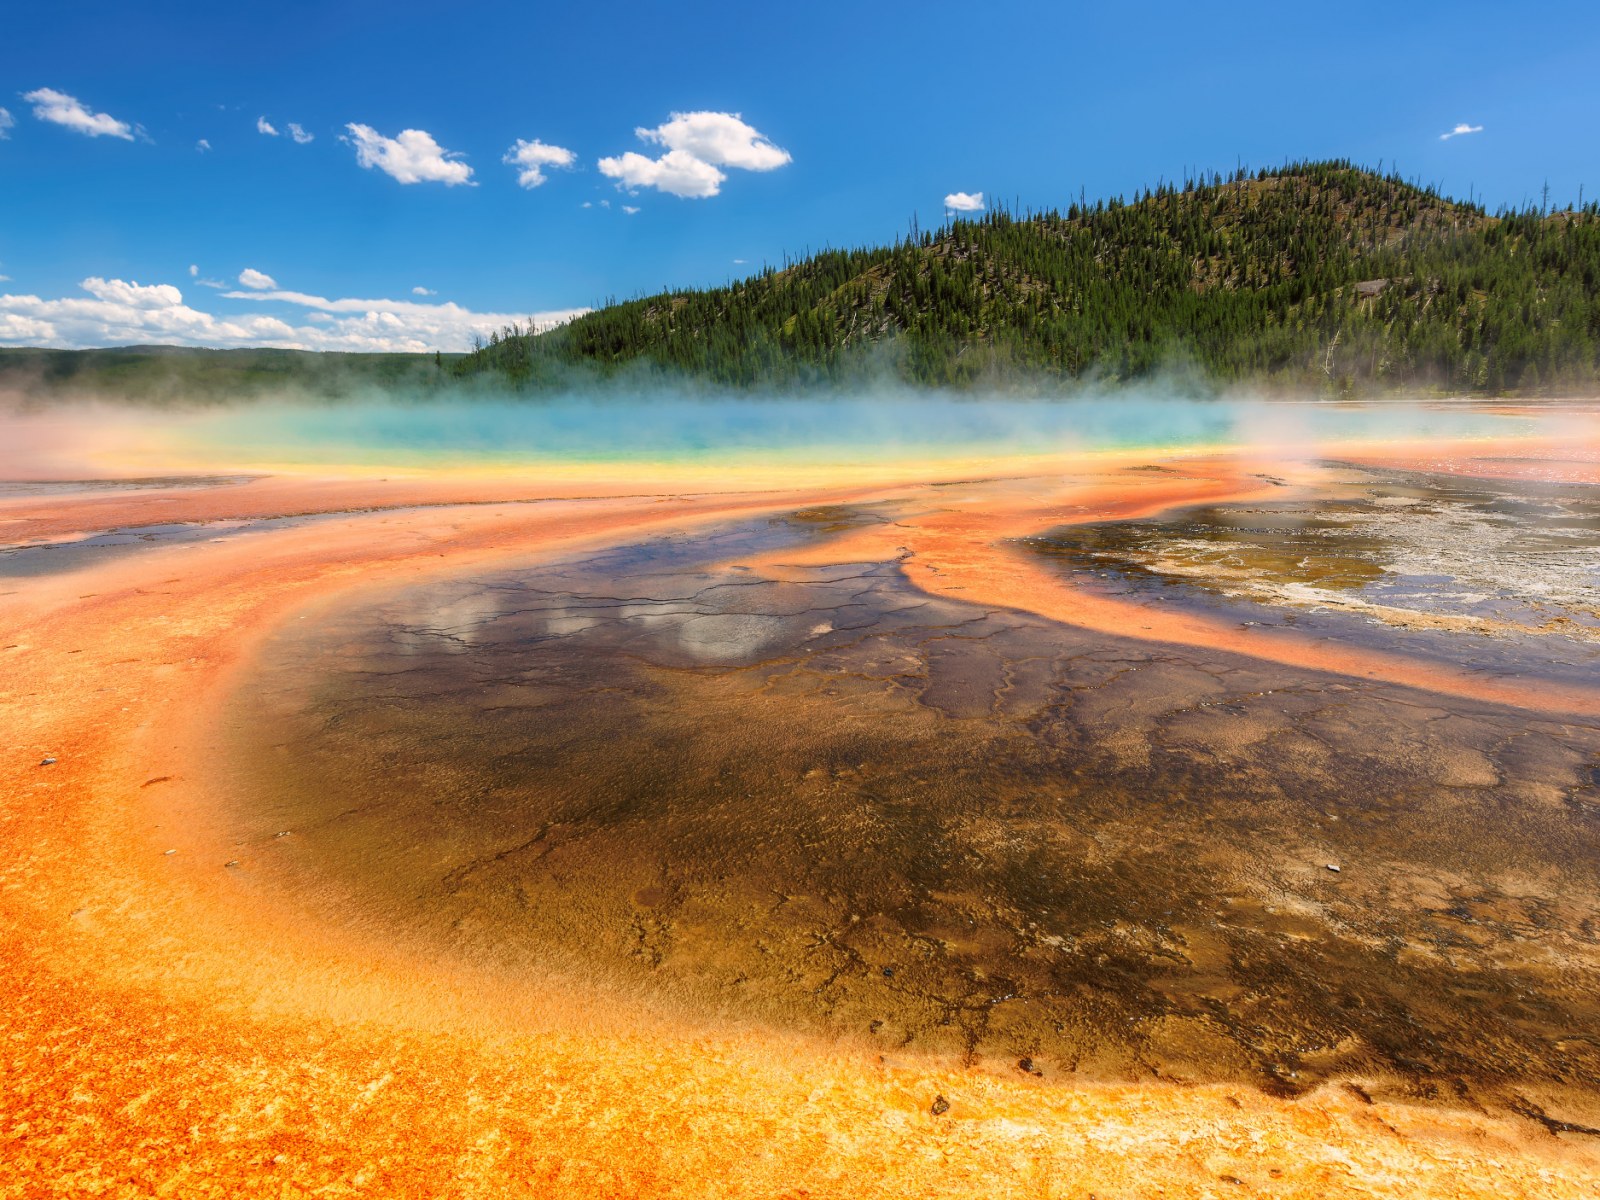 Yellowstone Volcano's Last Supereruption Started with Decades of Explosions